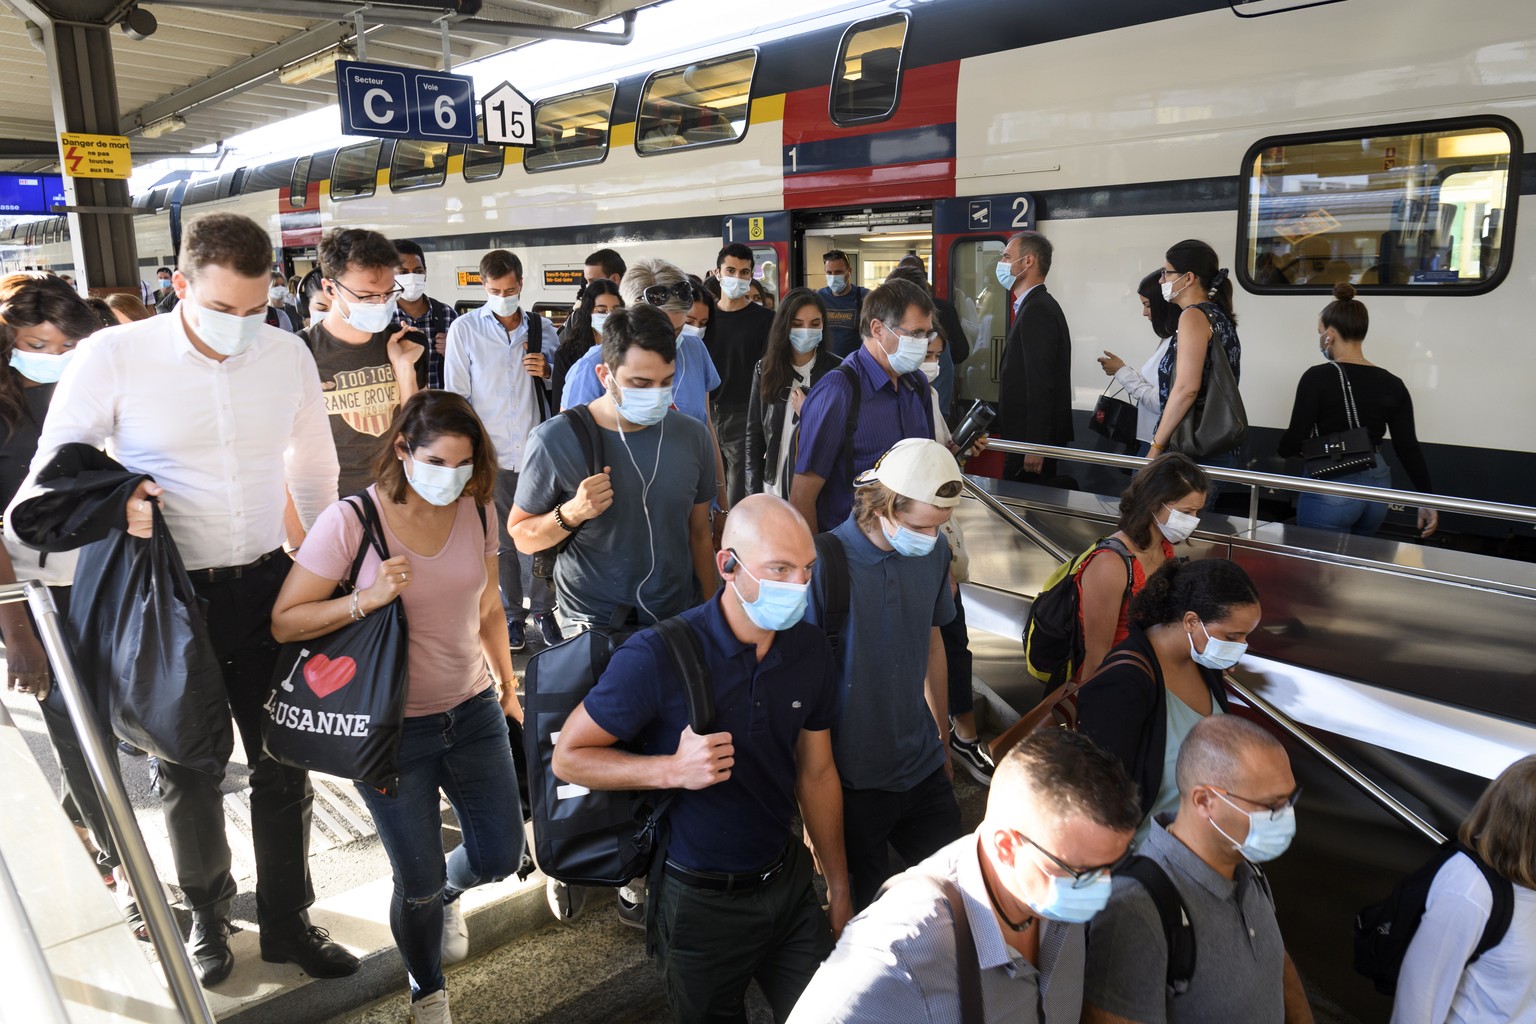 epa08529995 Passengers wearing face masks exit a train at a rail station in Lausanne, Switzerland, 06 July 2020. Swiss authorities have mandated the use of face masks, starting on 06 July, for all peo ...